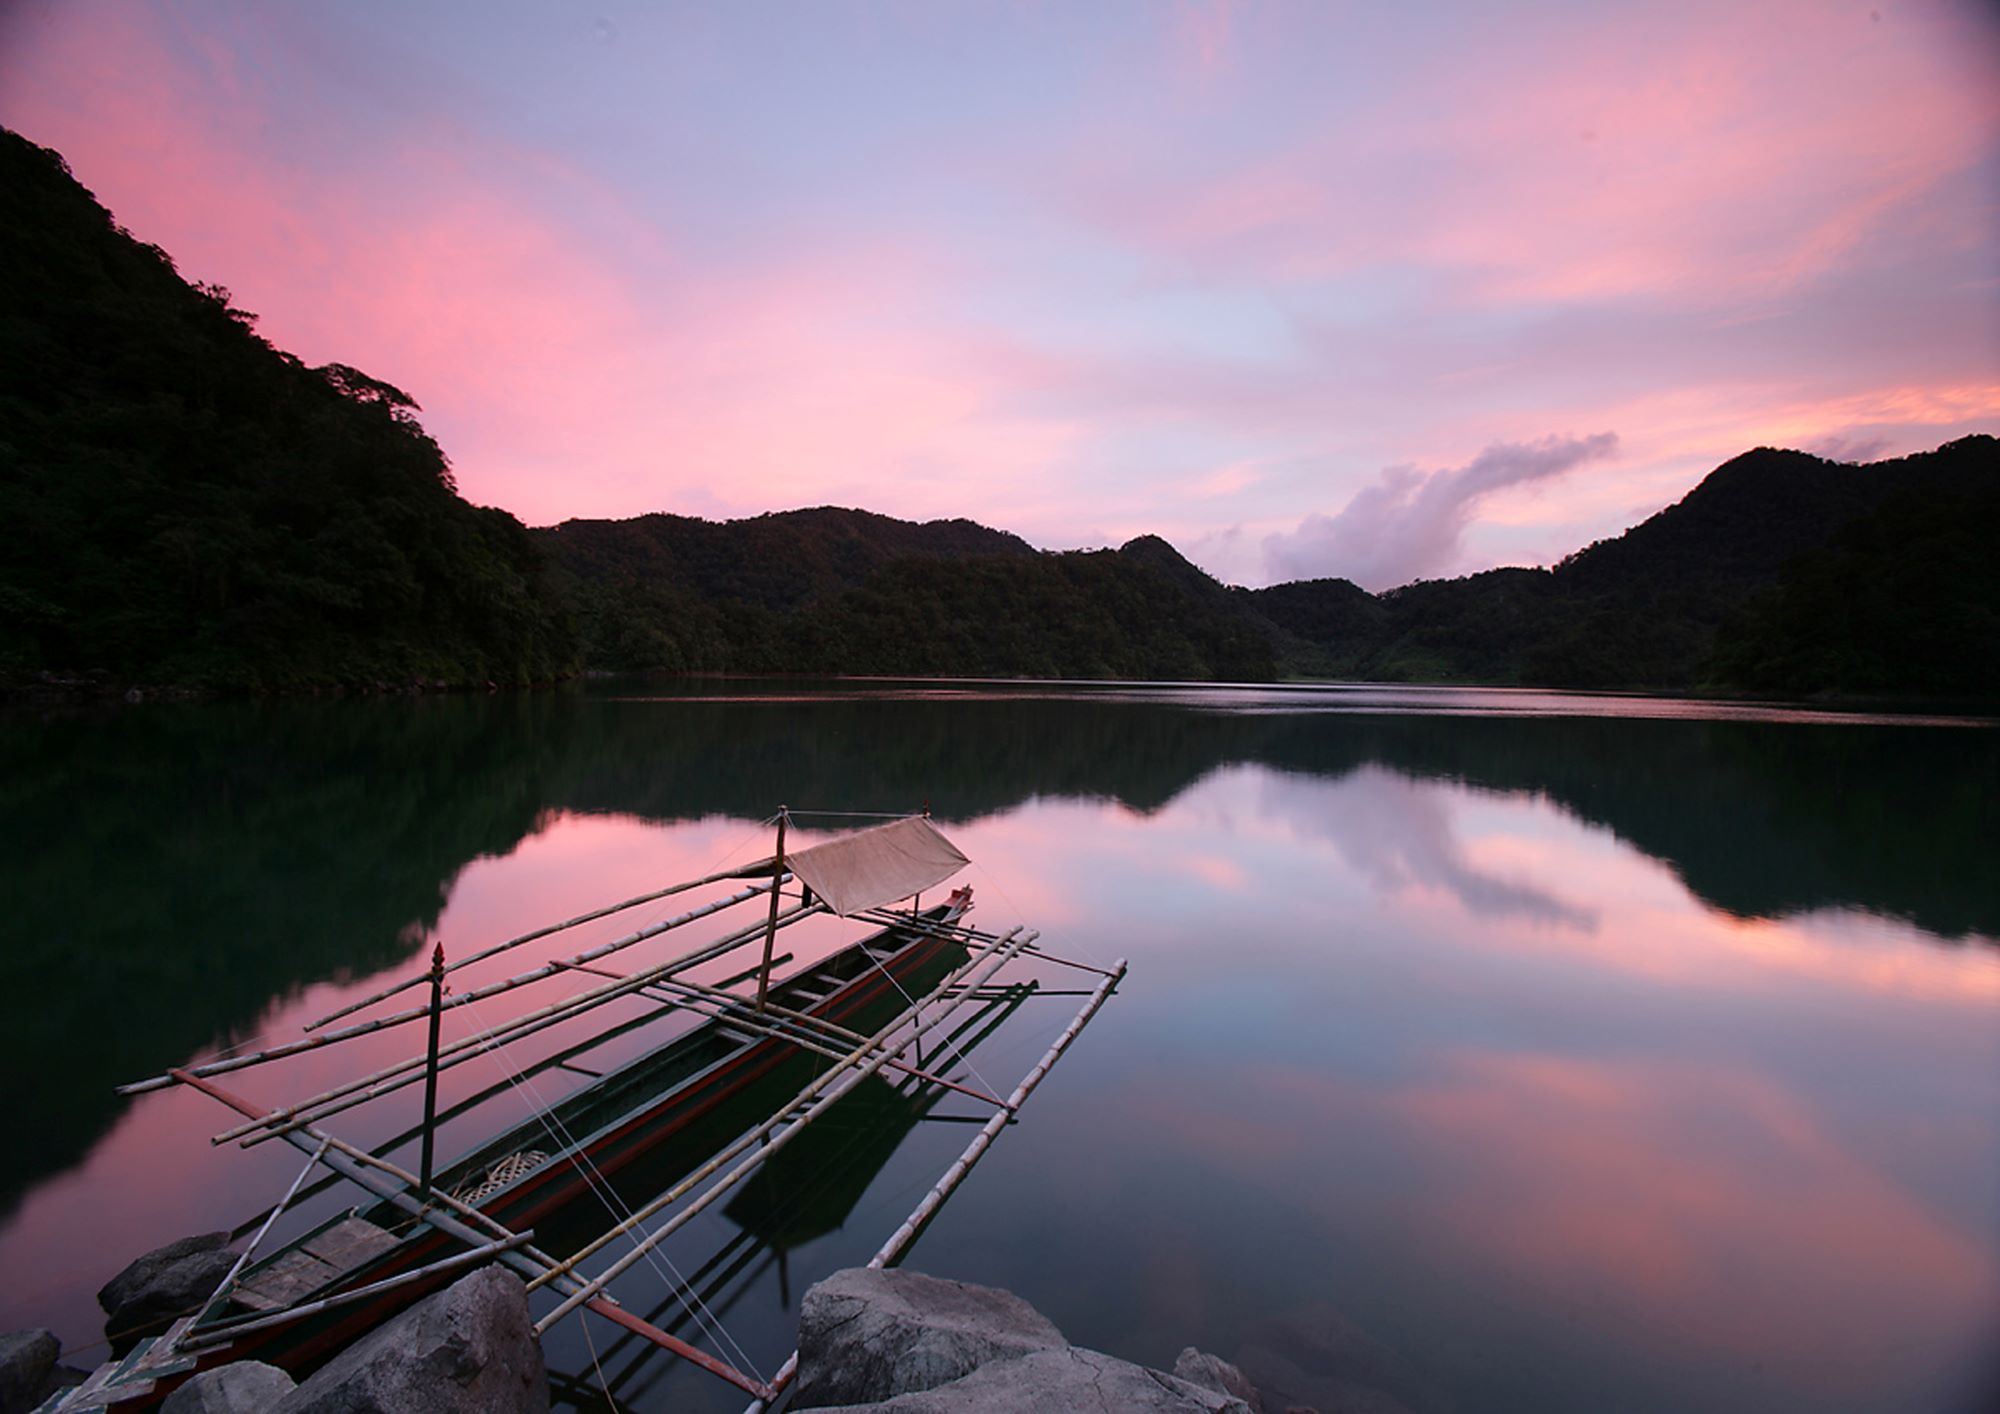 Sunset over the Twin lakes with a little boat in the Philippines which is one of most popular excursions near Dumaguete